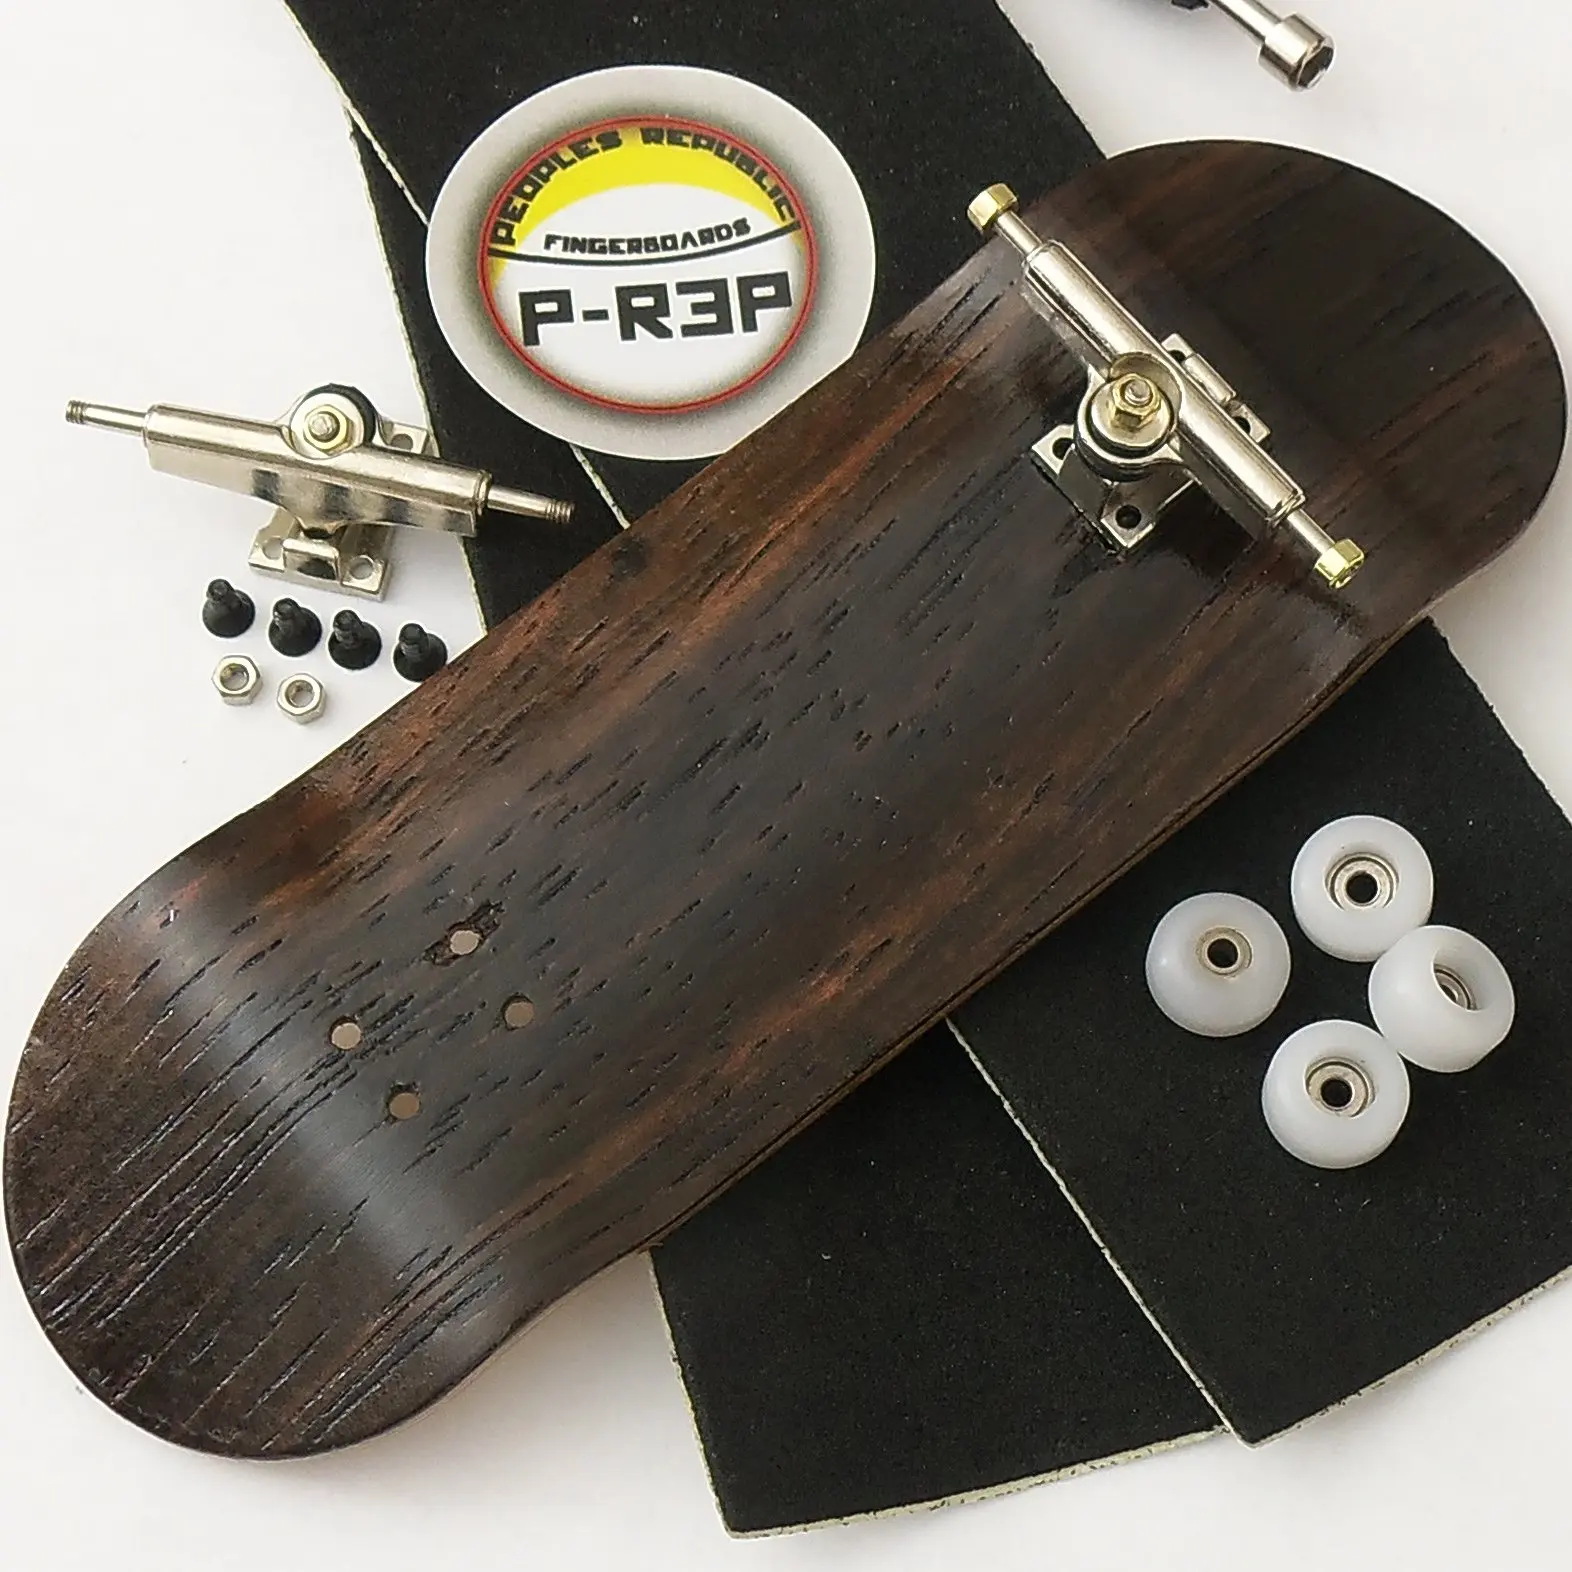 Why ebony used for fingerboard